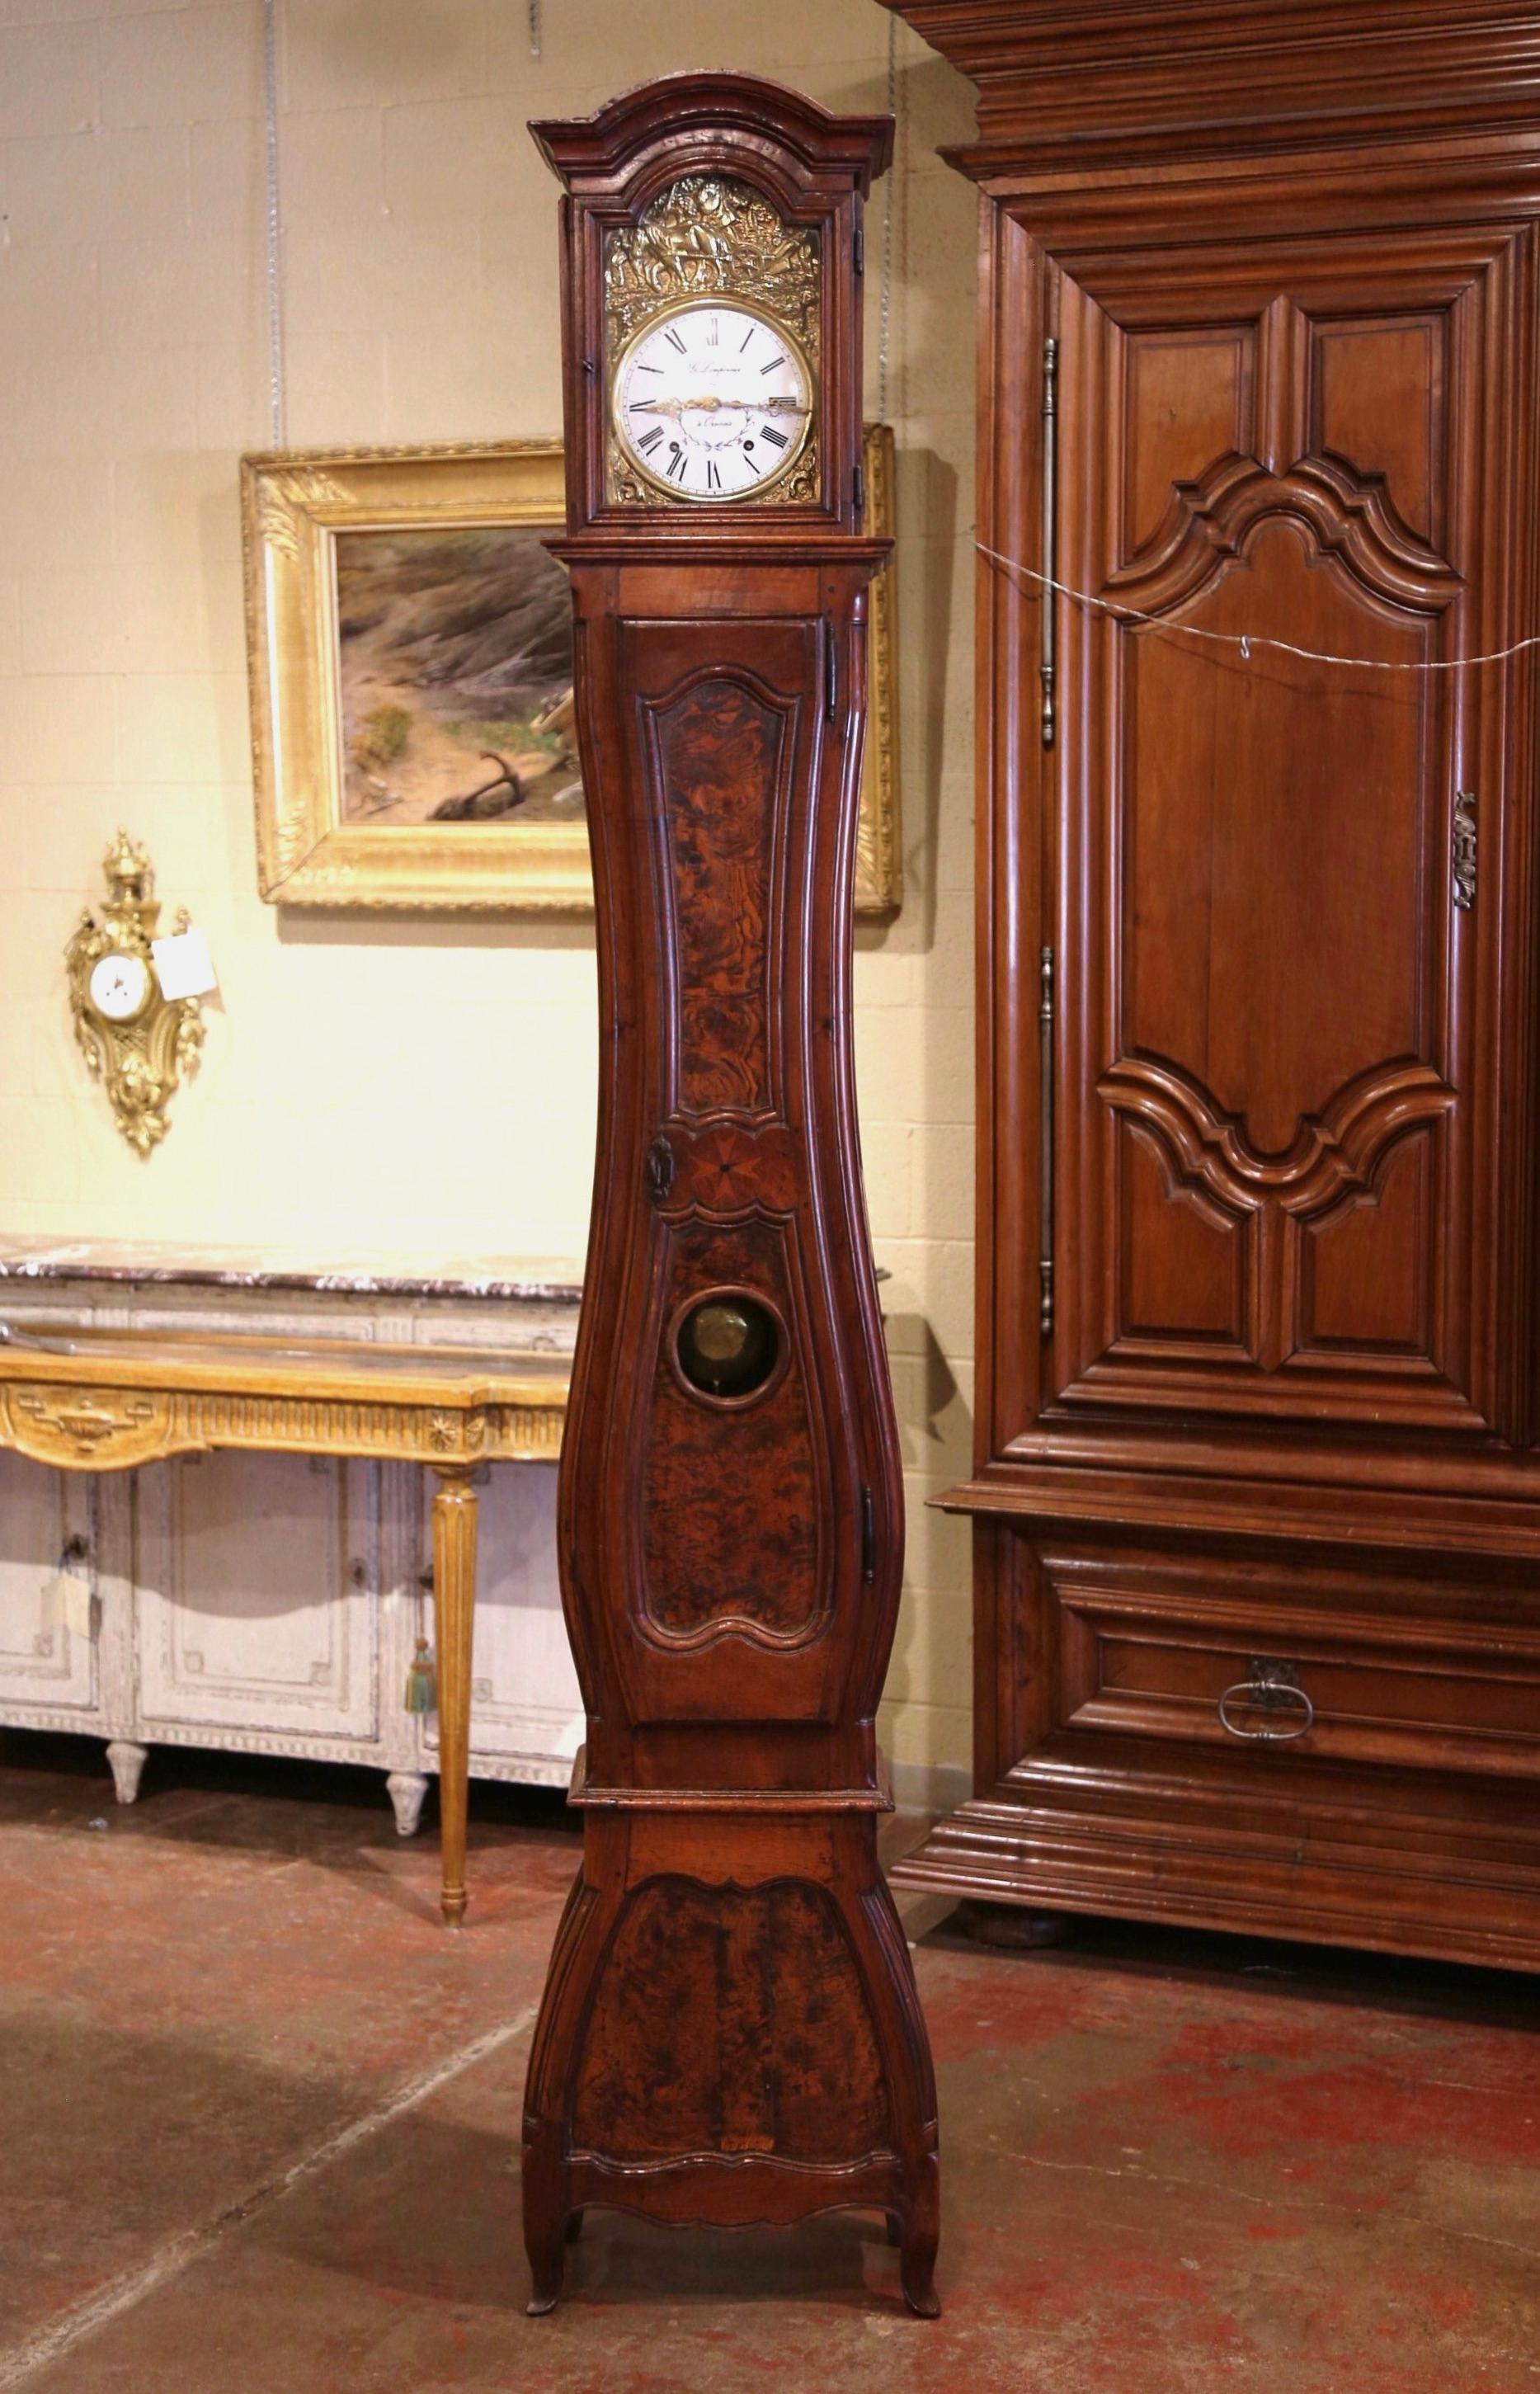 Crafted in Lyon, France, circa 1760 and built in one section, the antique fruitwood grandfather clock stands on curved feet over a scalloped apron, and features beautiful carved lines including a bonnet top over a violin shape body. The case with